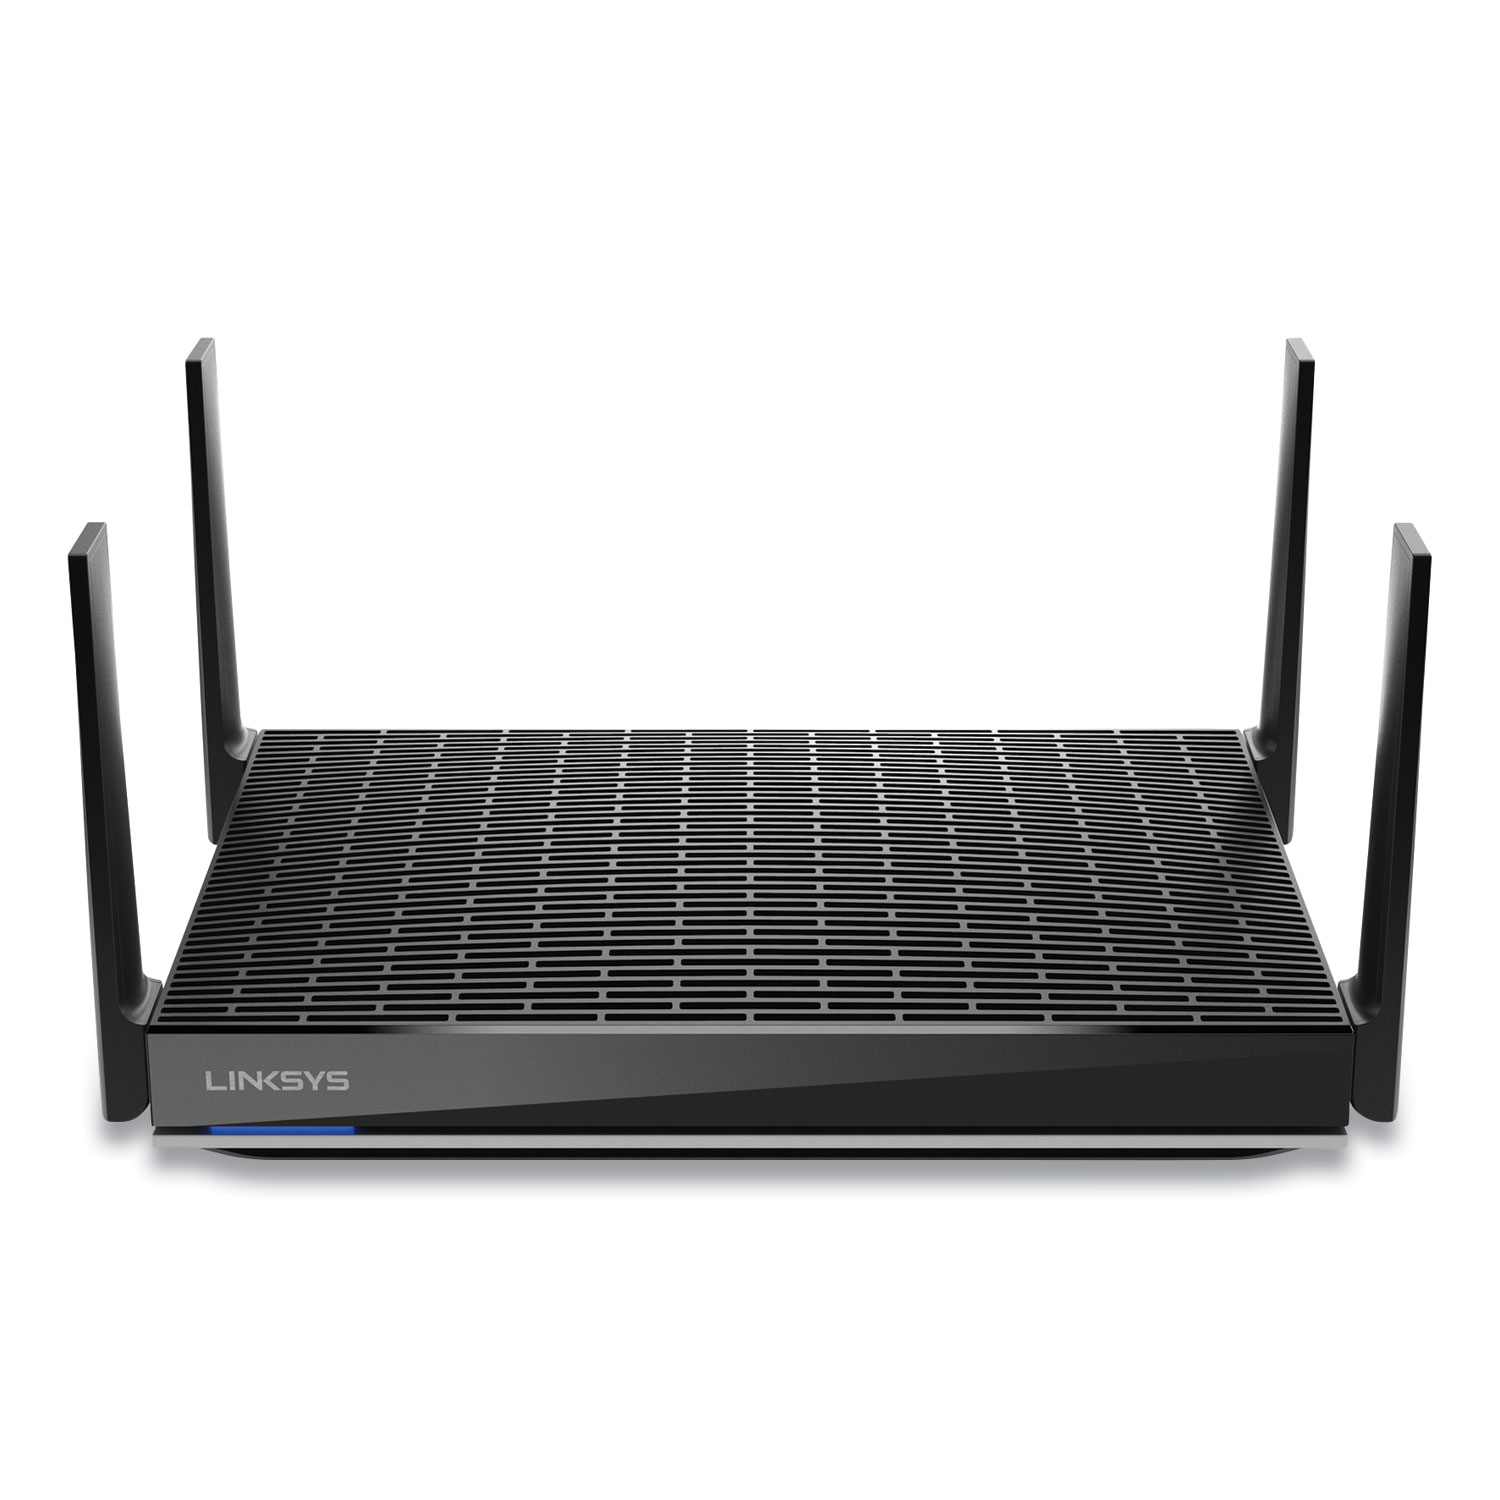 LINKSYS™ MR9600 Dual-Band Mesh Router, 5 Ports, 2.4 GHz/5 GHz